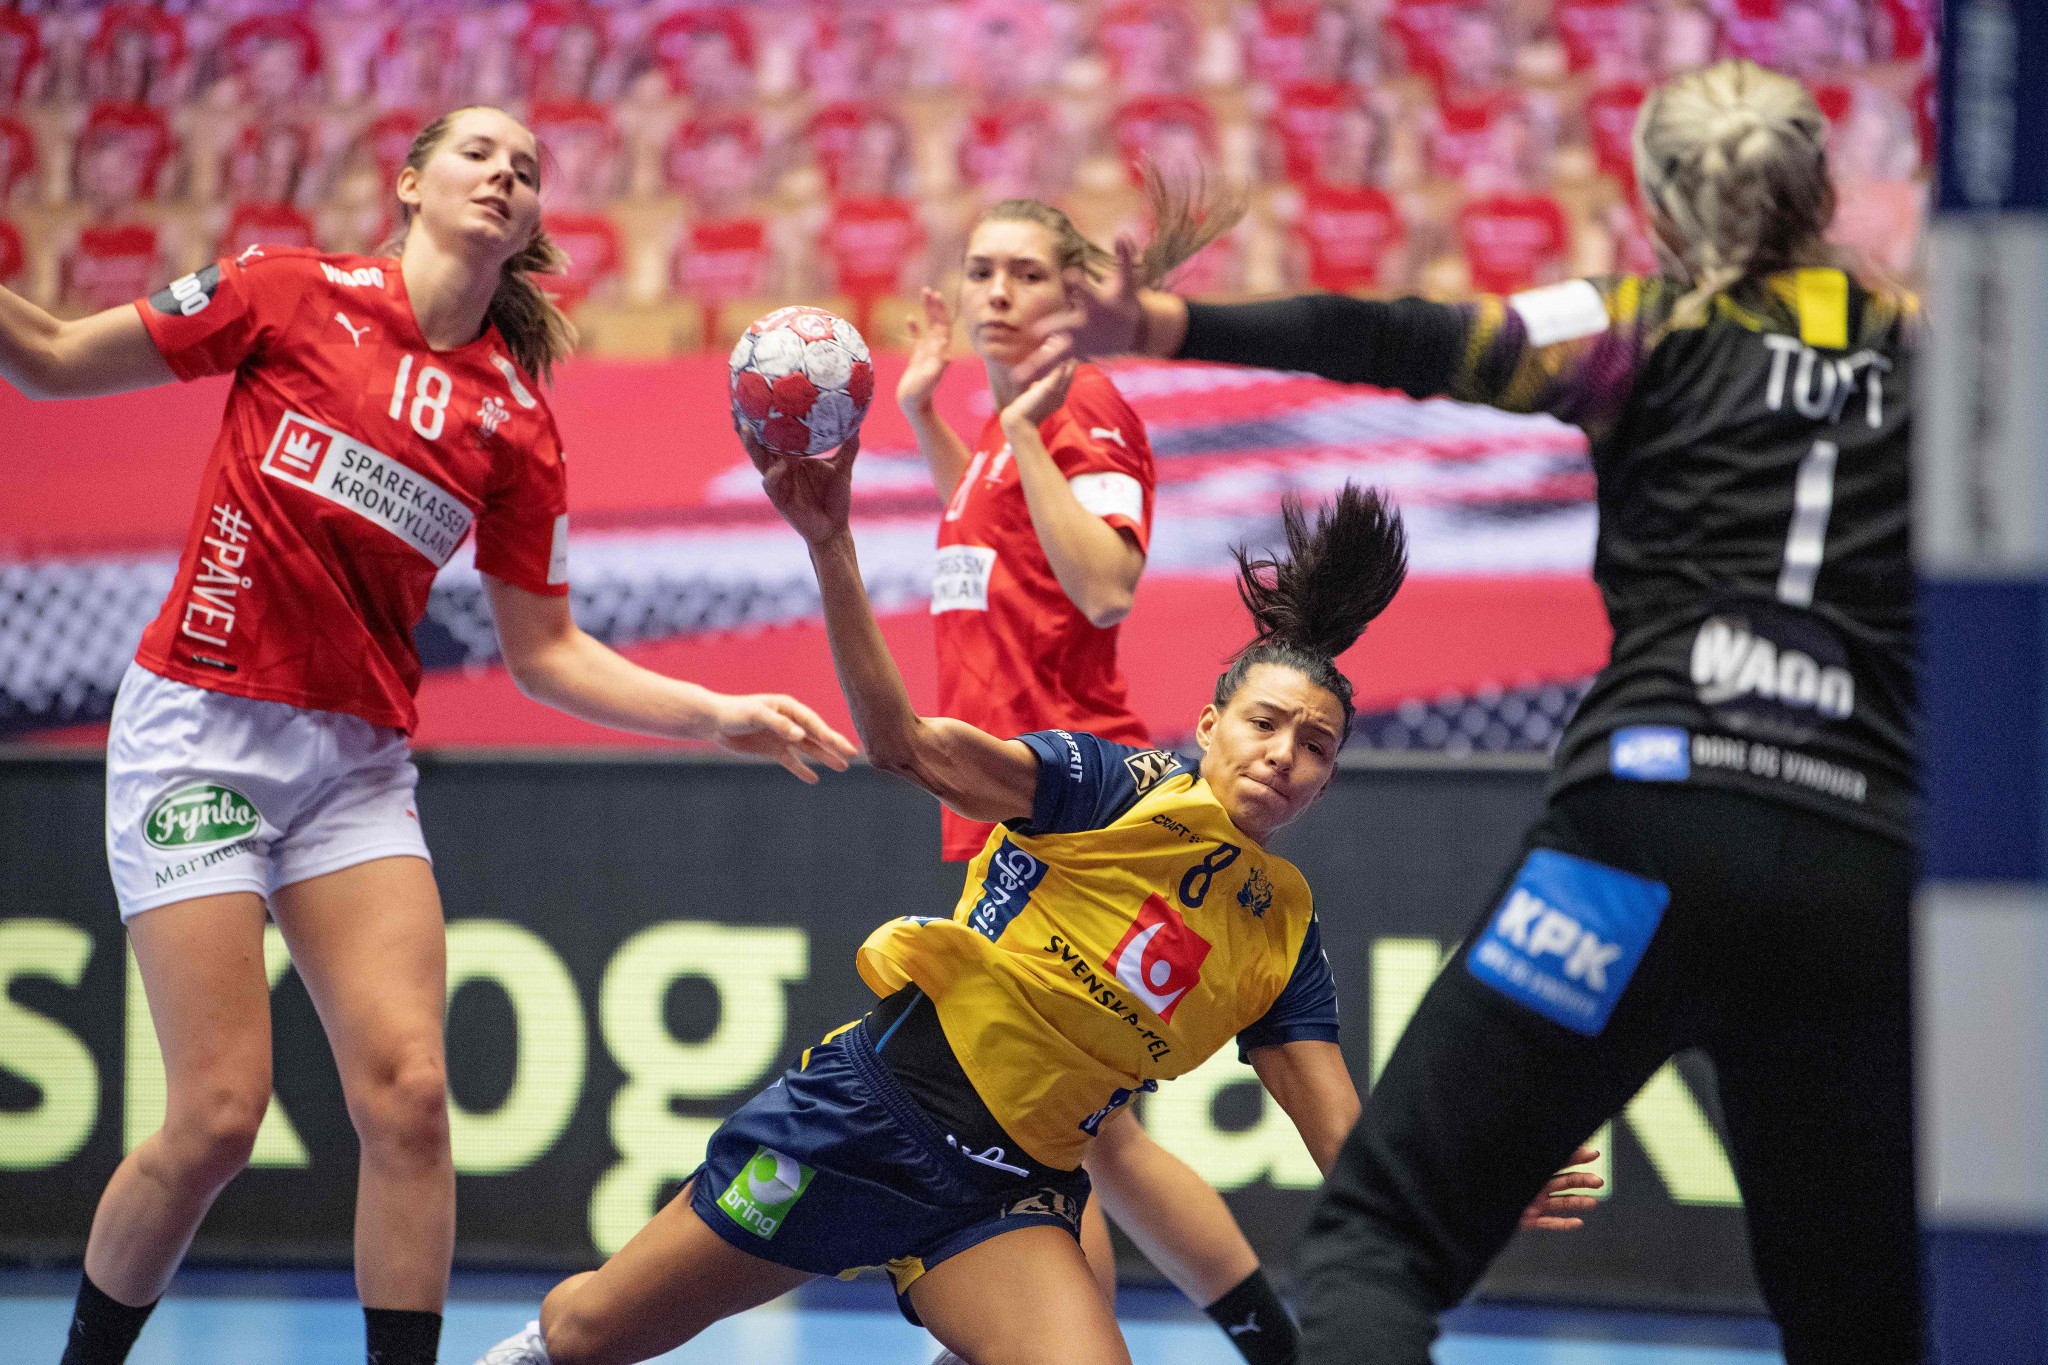 Hosts for four European Championships confirmed at EHF Congress